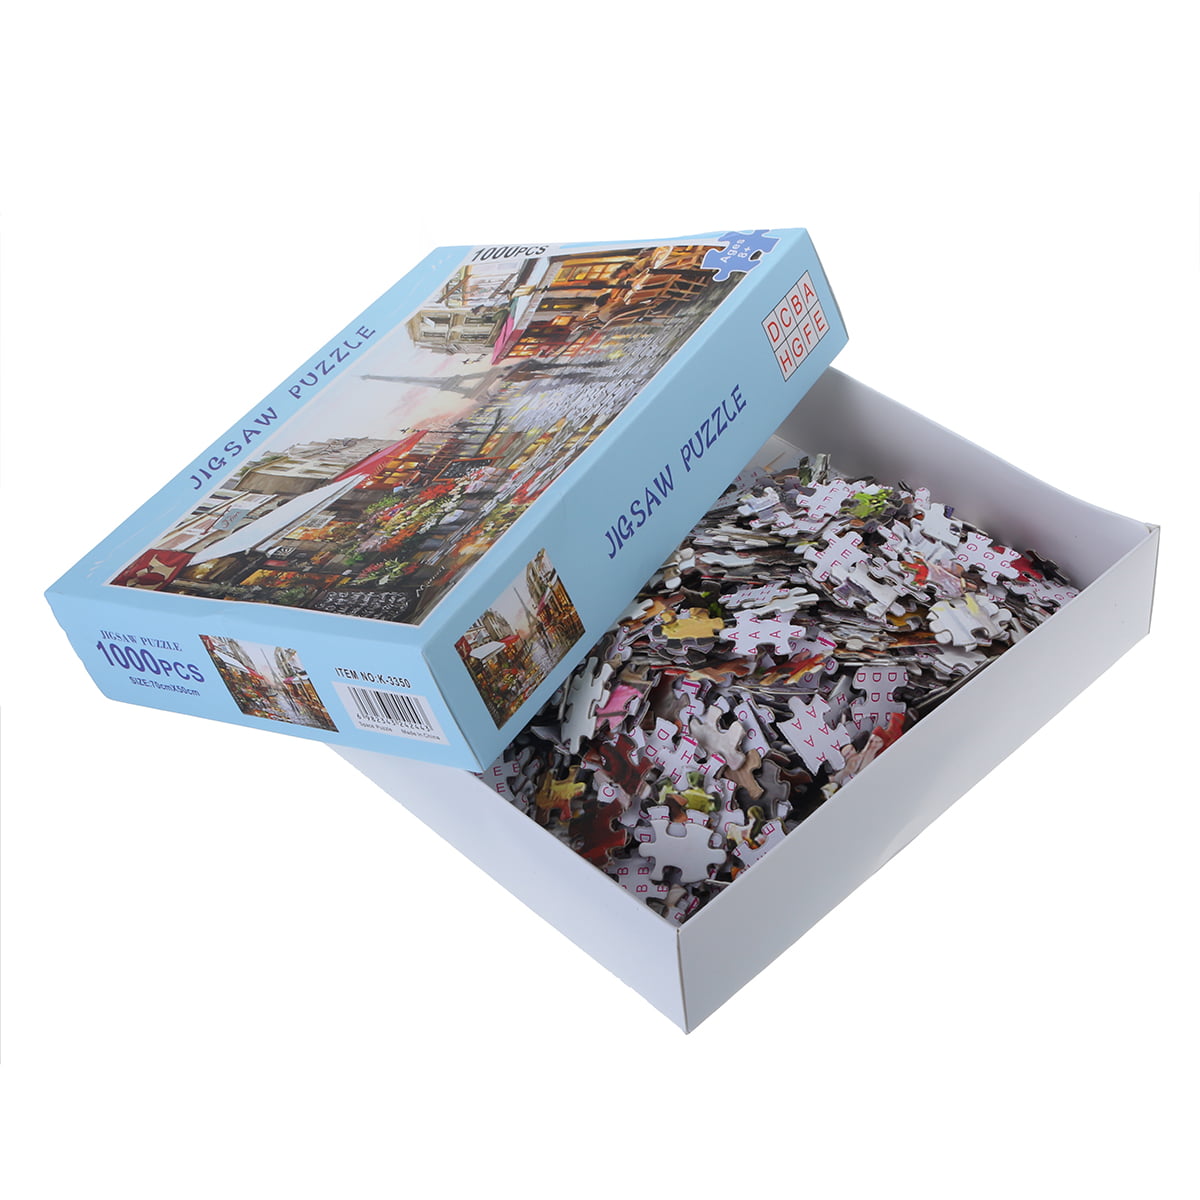 Wooden Puzzle 1000 Pieces Beautiful French Street Puzzles Assembling